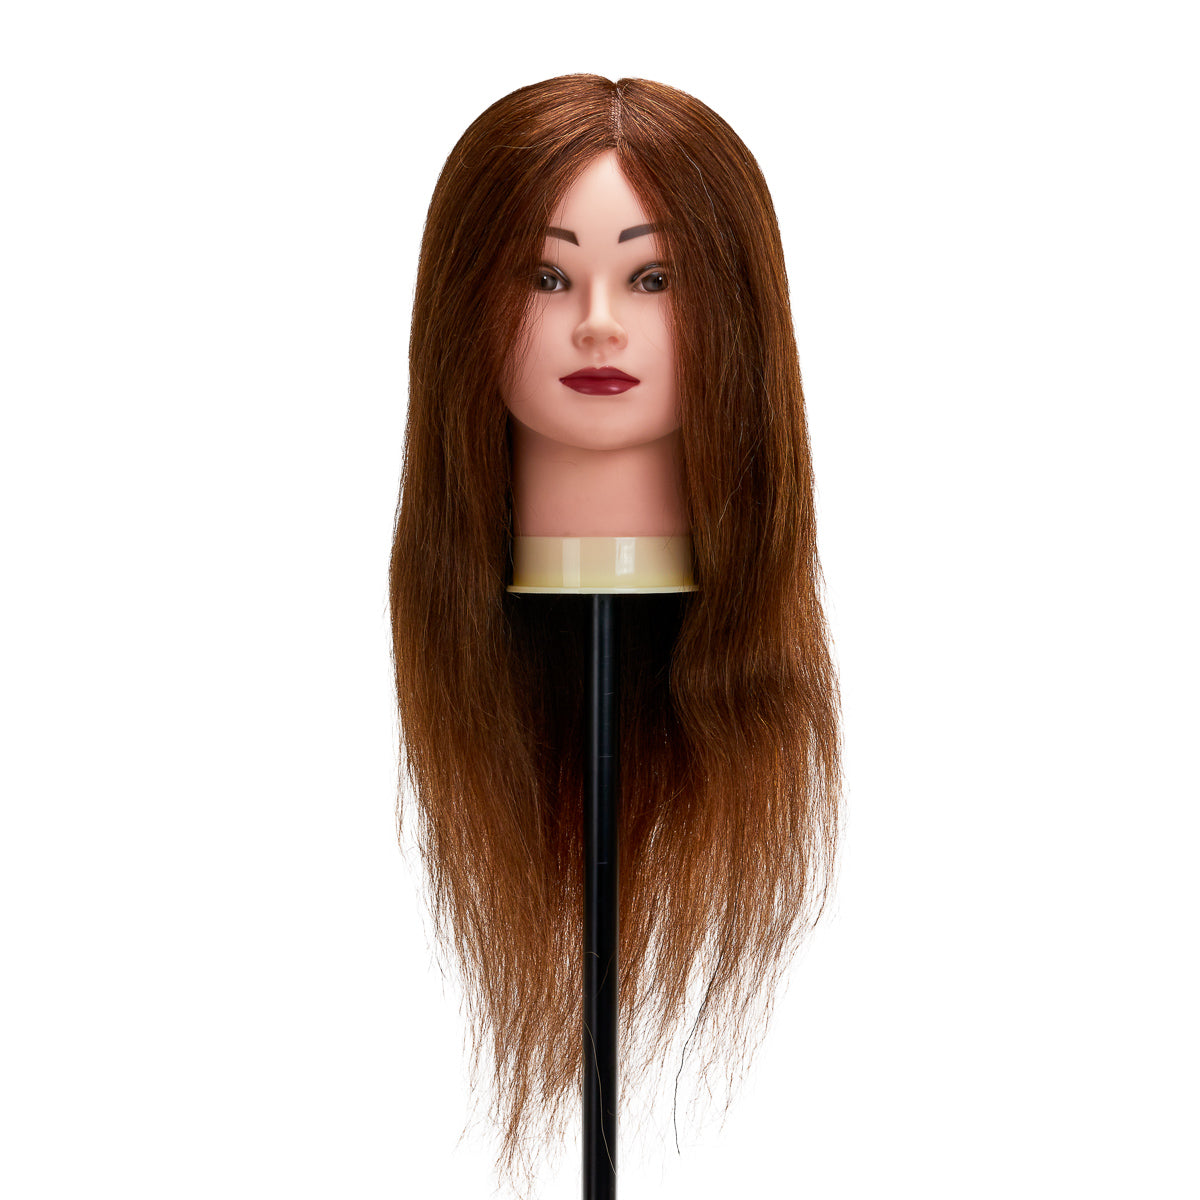 Gabbiano WZ1 Hairdressing Training Head with Real Hair, Color 4#, Length 20" 